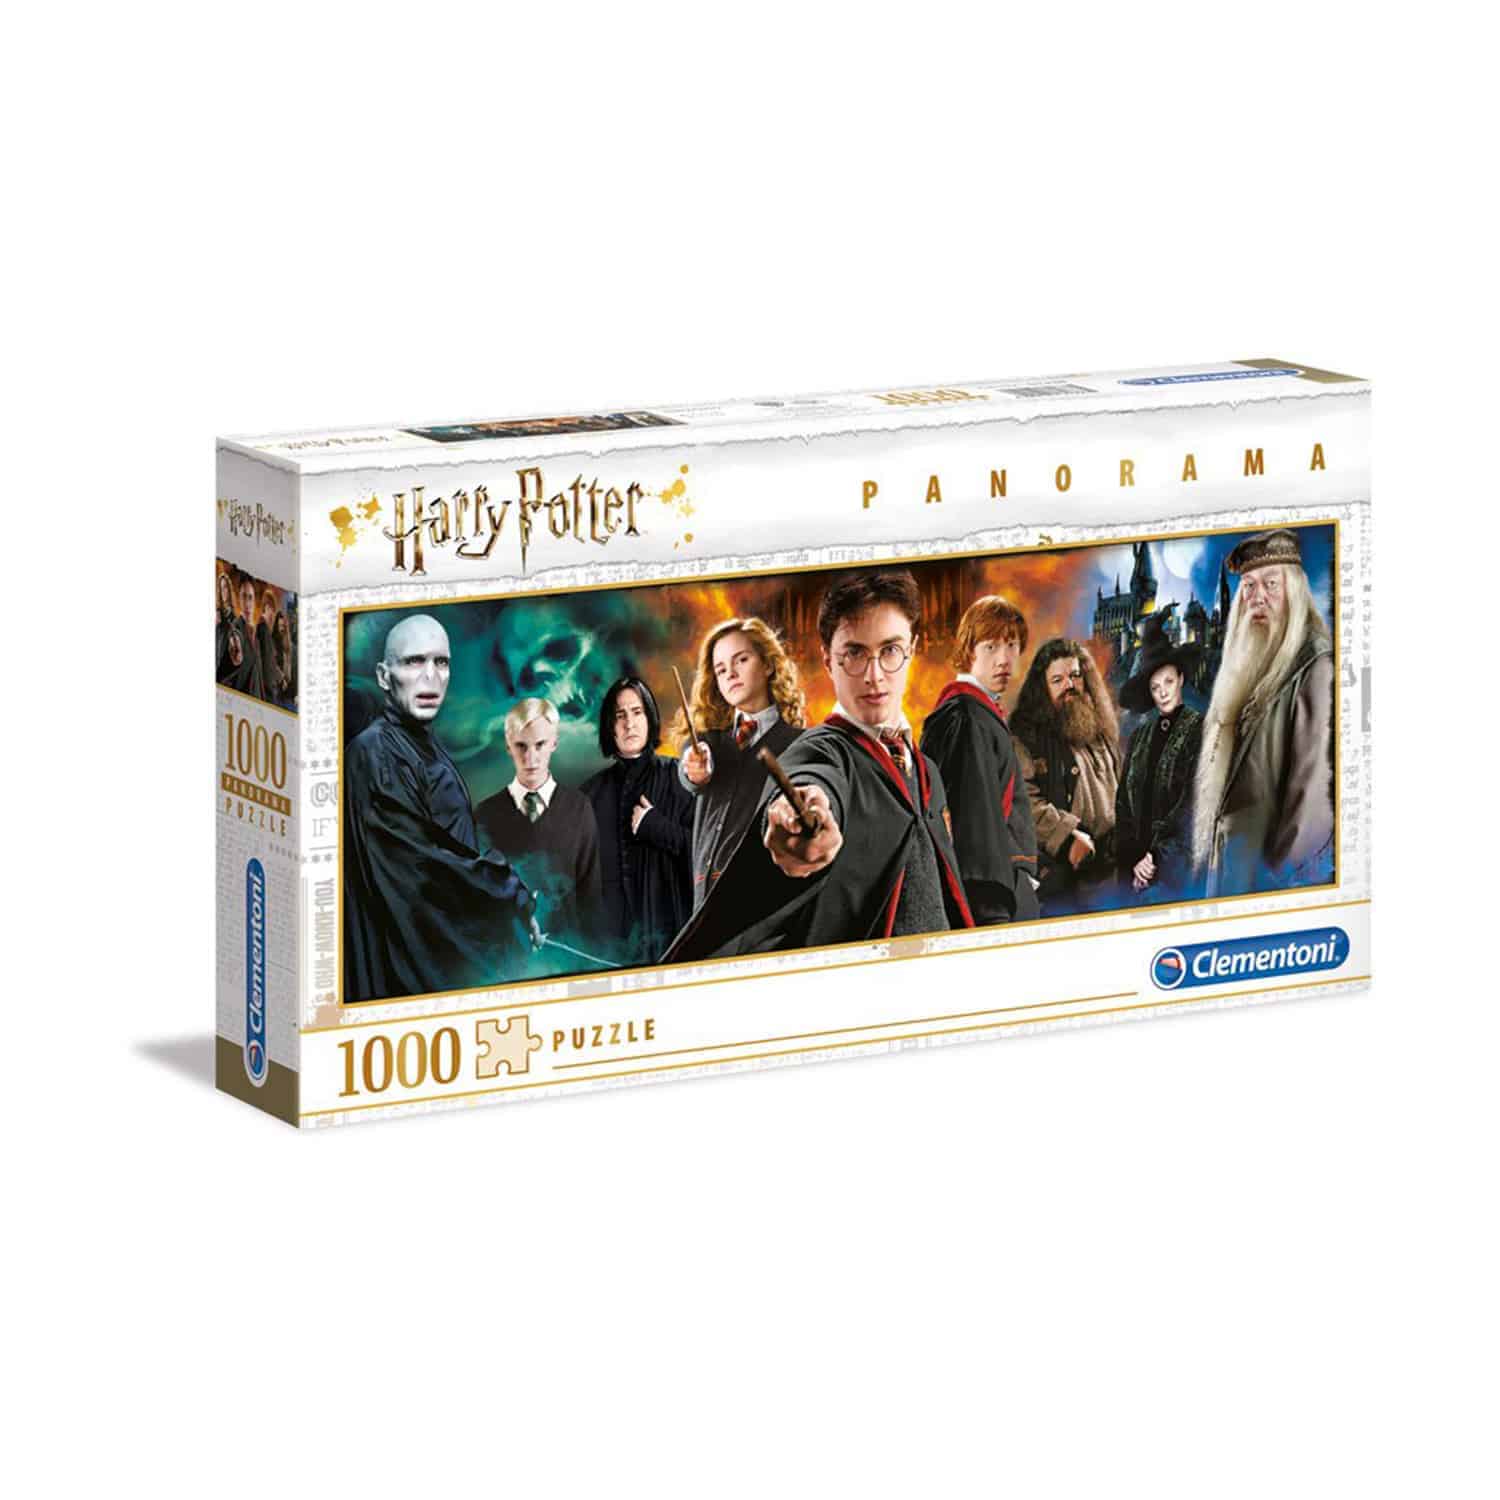 Harry Potter - Characters Panorama Puzzle 1000pcs